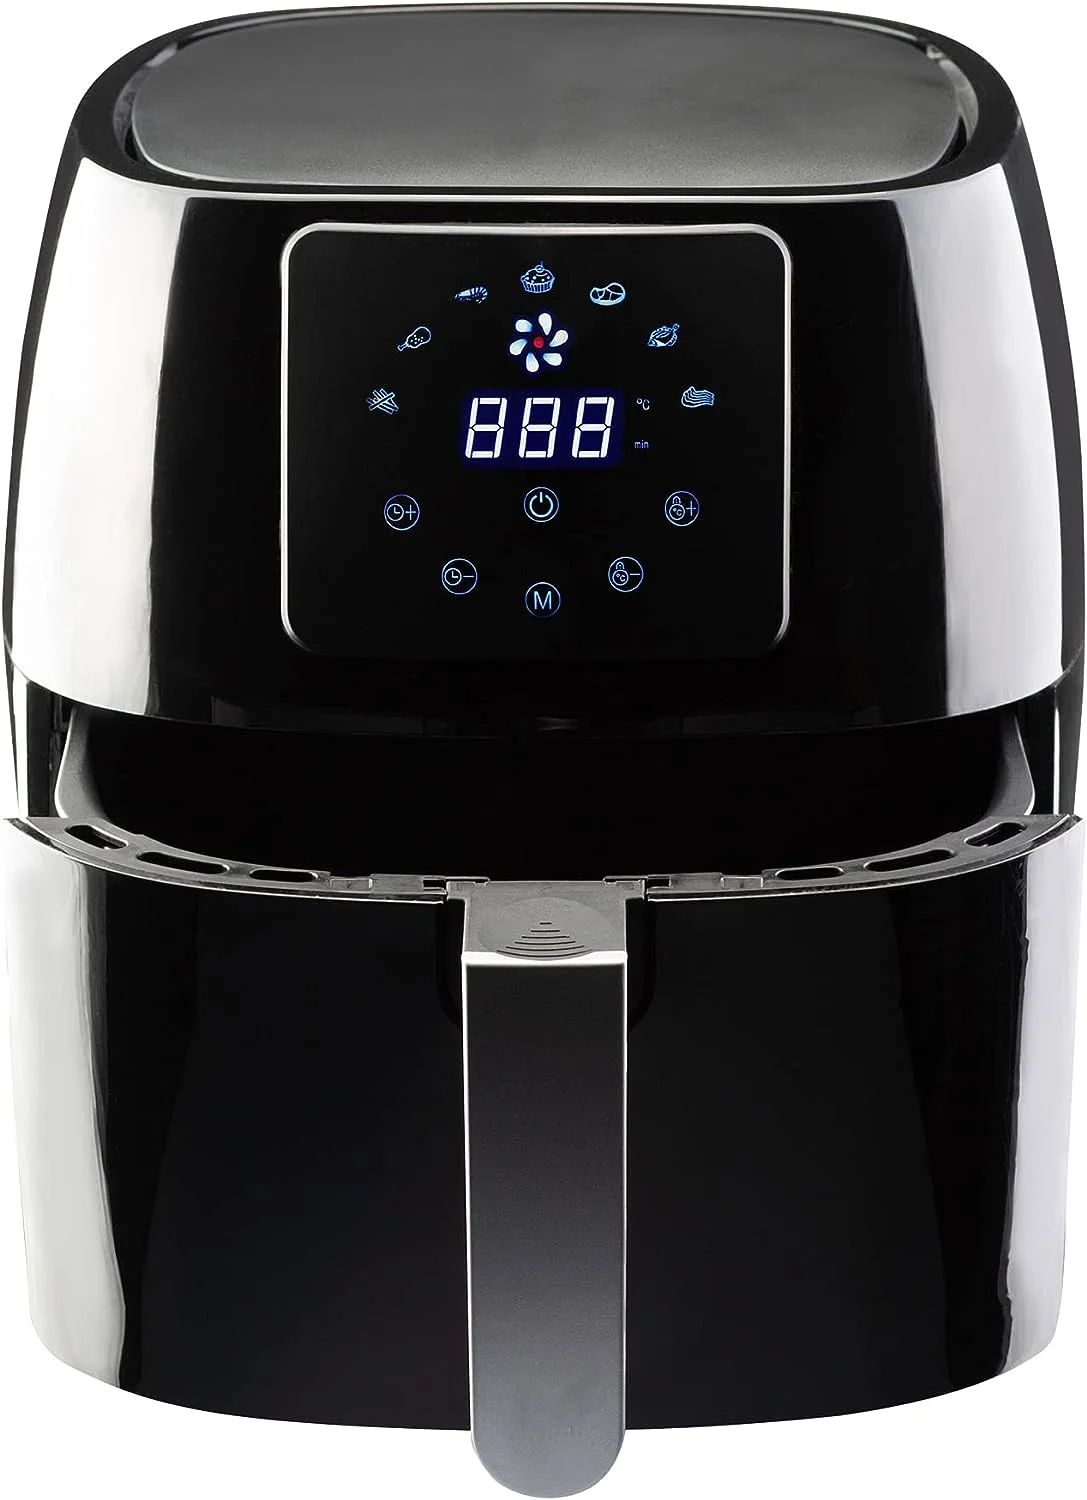 

4.75 Qt Compact Air Fryer with Digital Display, 7 Simple Cooking Presets & Fully Adjustable Temperature, Easy Clean Detatcha